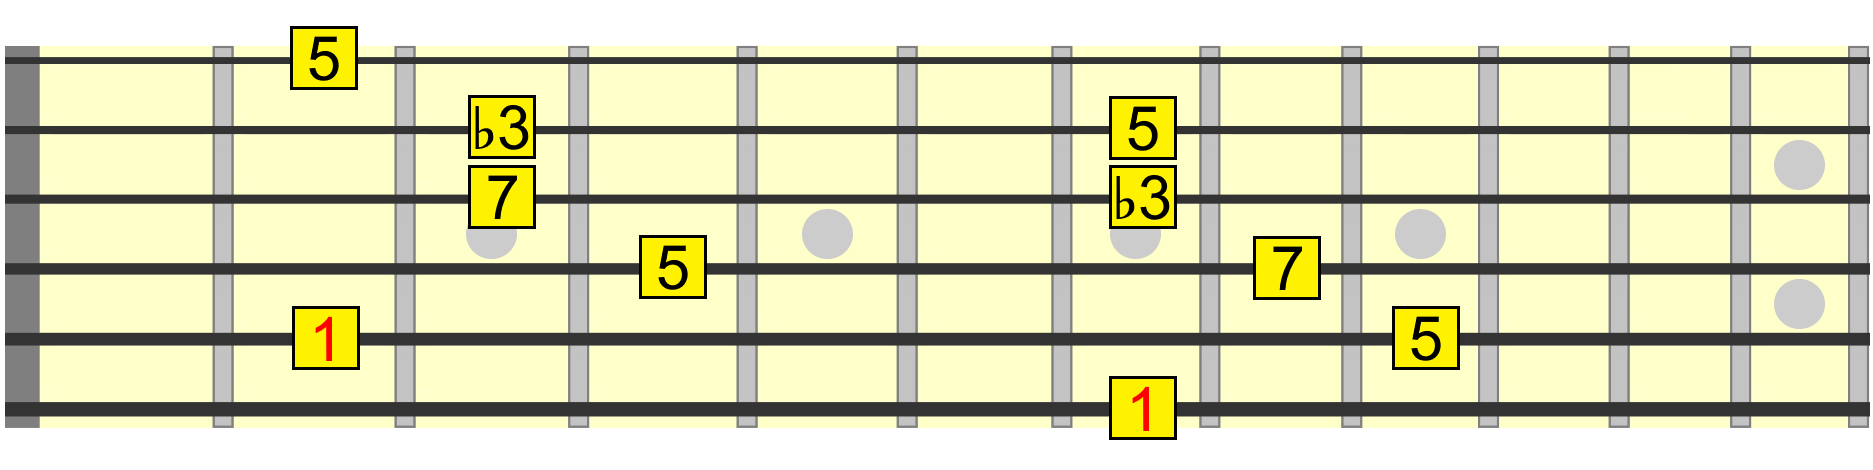 Melodic Minor Scale on Guitar - Everything You Need To Know